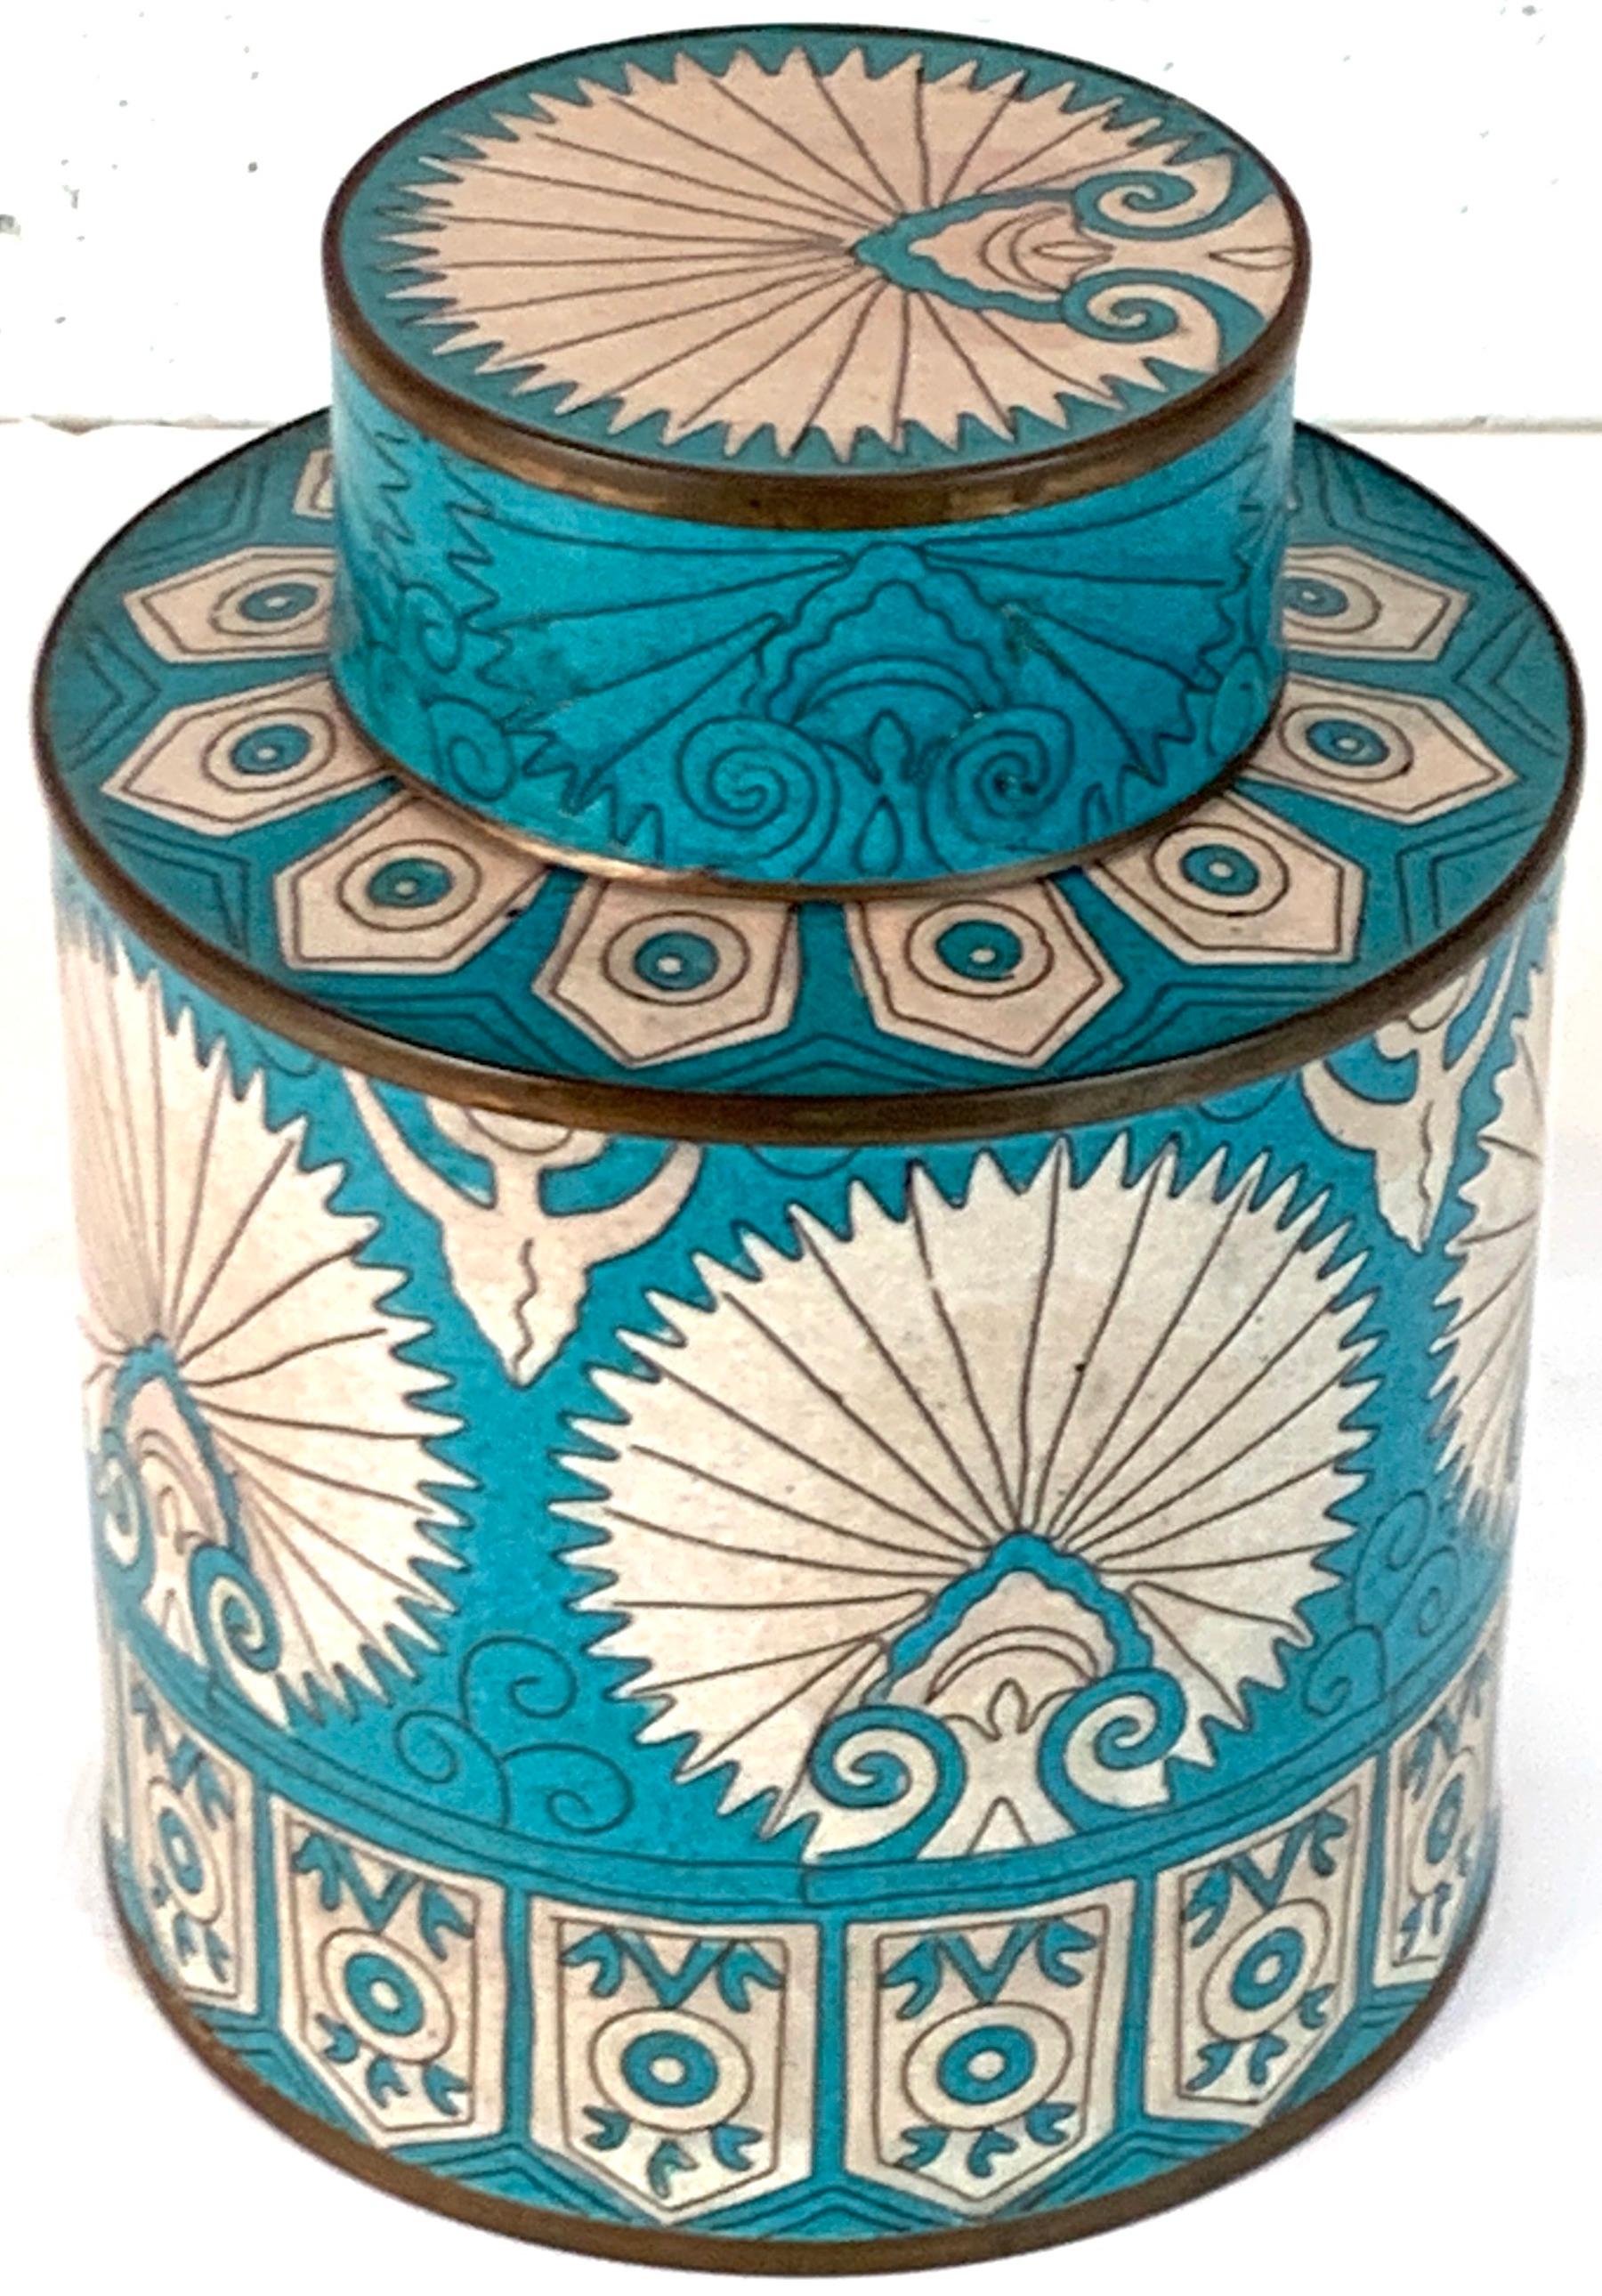 French Fabienne Jouvin Blue and White Shell Motif Cloisonné Ginger Jar, circa 1980